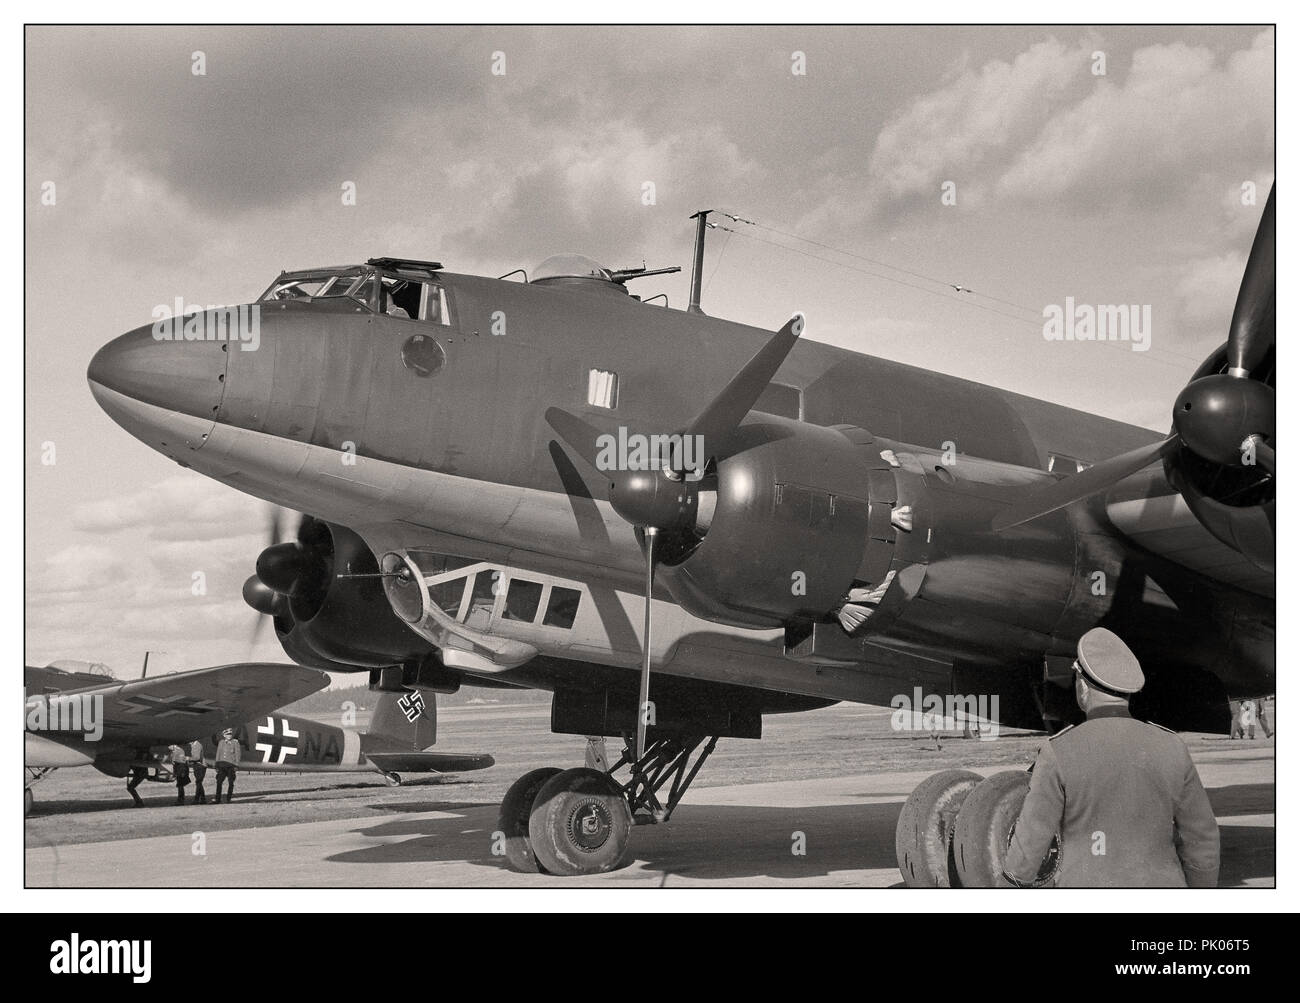 Focke-Wulf Fw 200 Condor Adolf Hitler's personal Luftwaffe Focke-Wulf Fw 200 Condor with Nazi Swastika insignia and fighter escort at Immola Airport during his visit to see Field Marshal Mannerheim 4 June 1942 in Finland Stock Photo